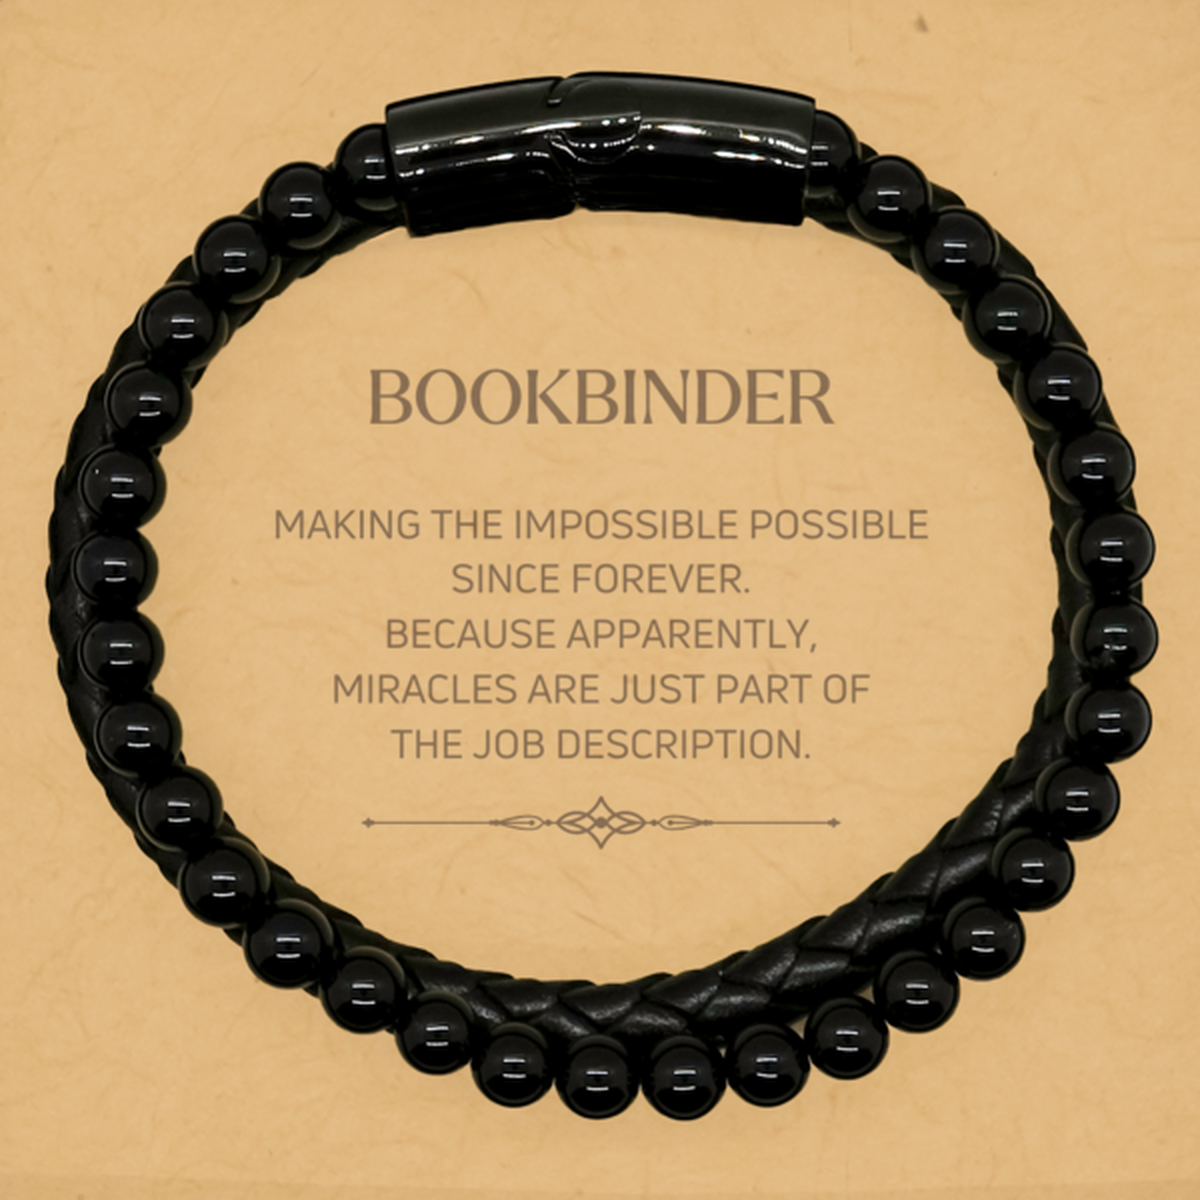 Funny Bookbinder Gifts, Miracles are just part of the job description, Inspirational Birthday Stone Leather Bracelets For Bookbinder, Men, Women, Coworkers, Friends, Boss